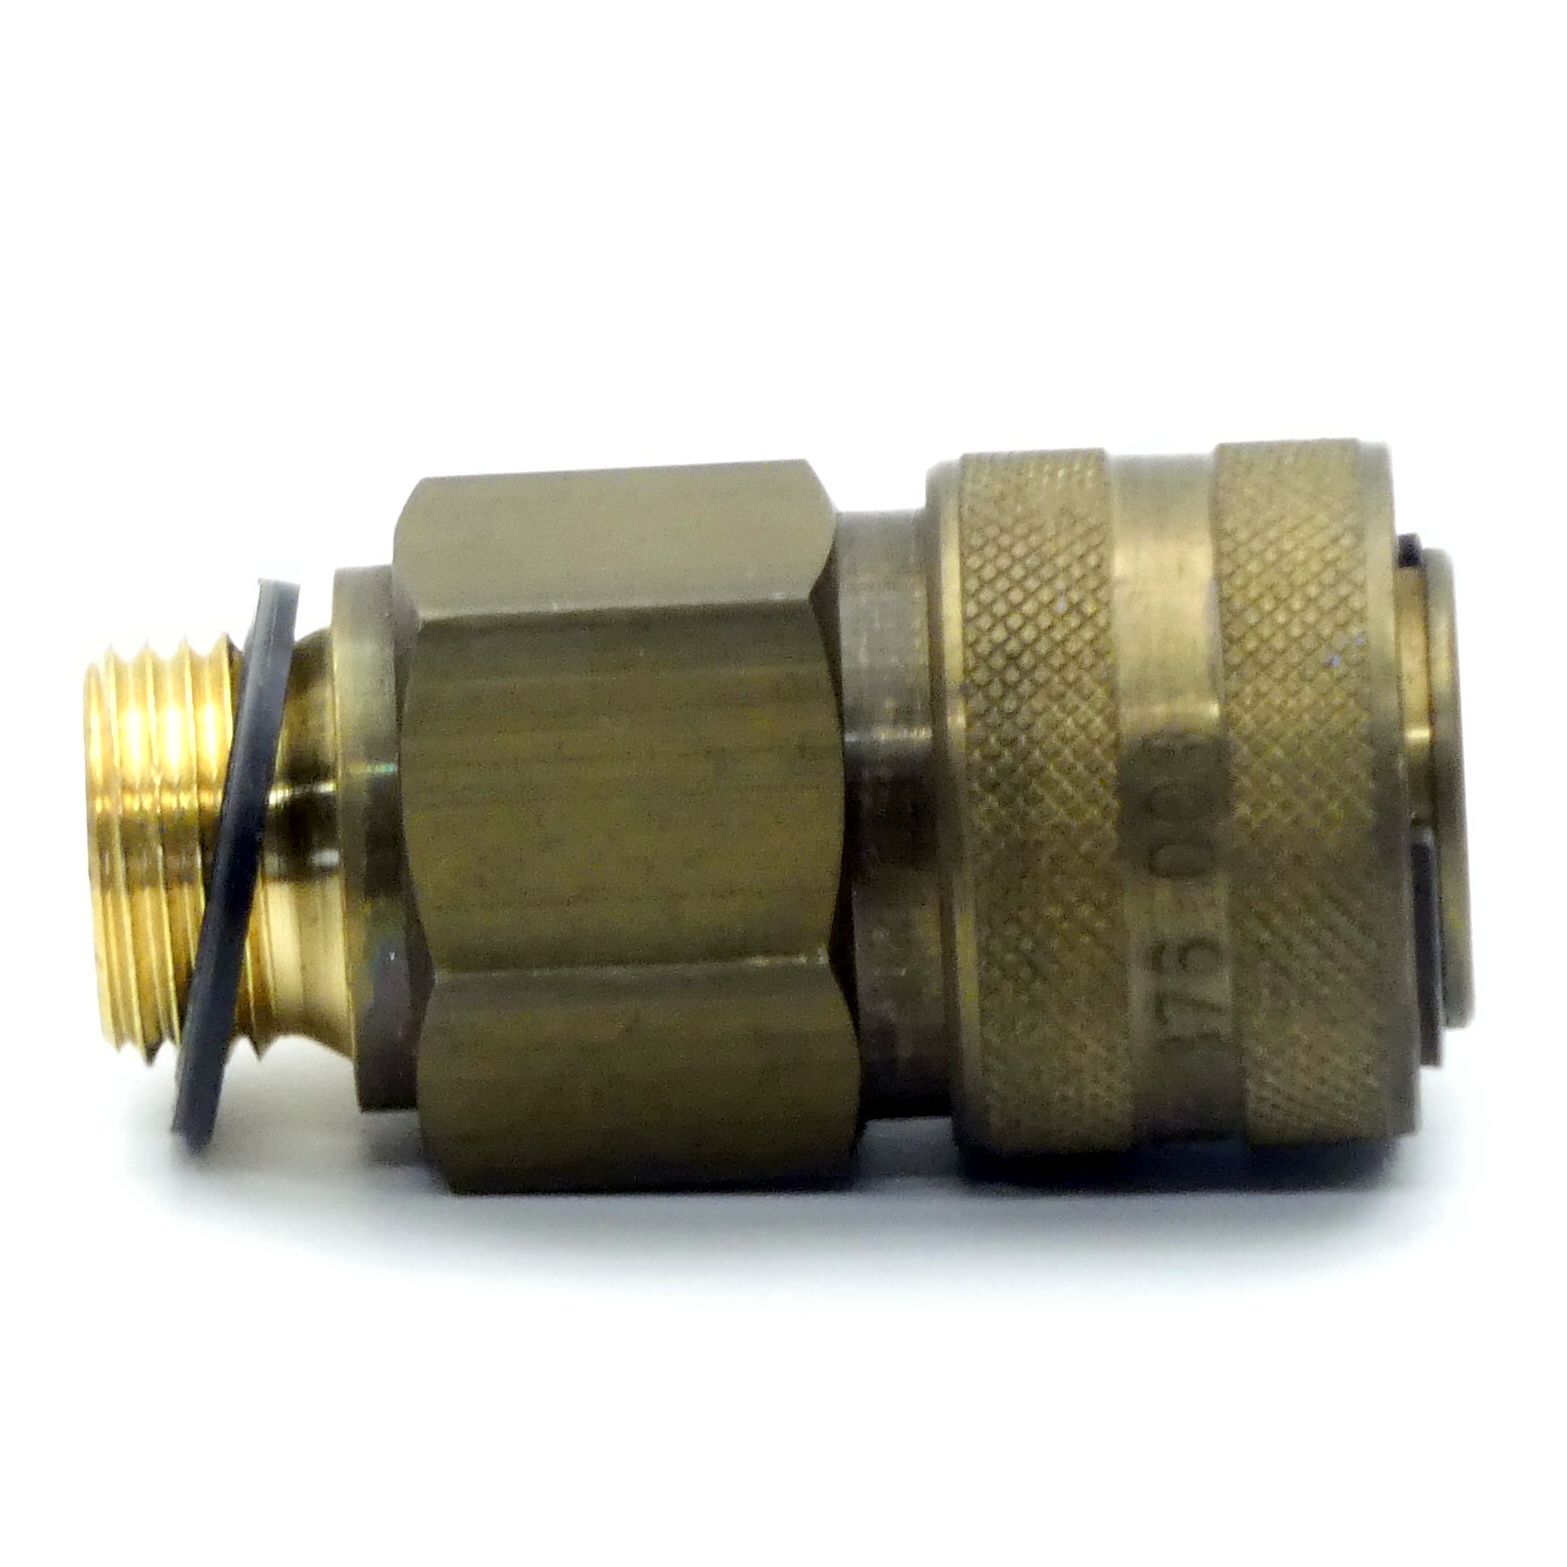 Locking coupling in the Pack of 25 